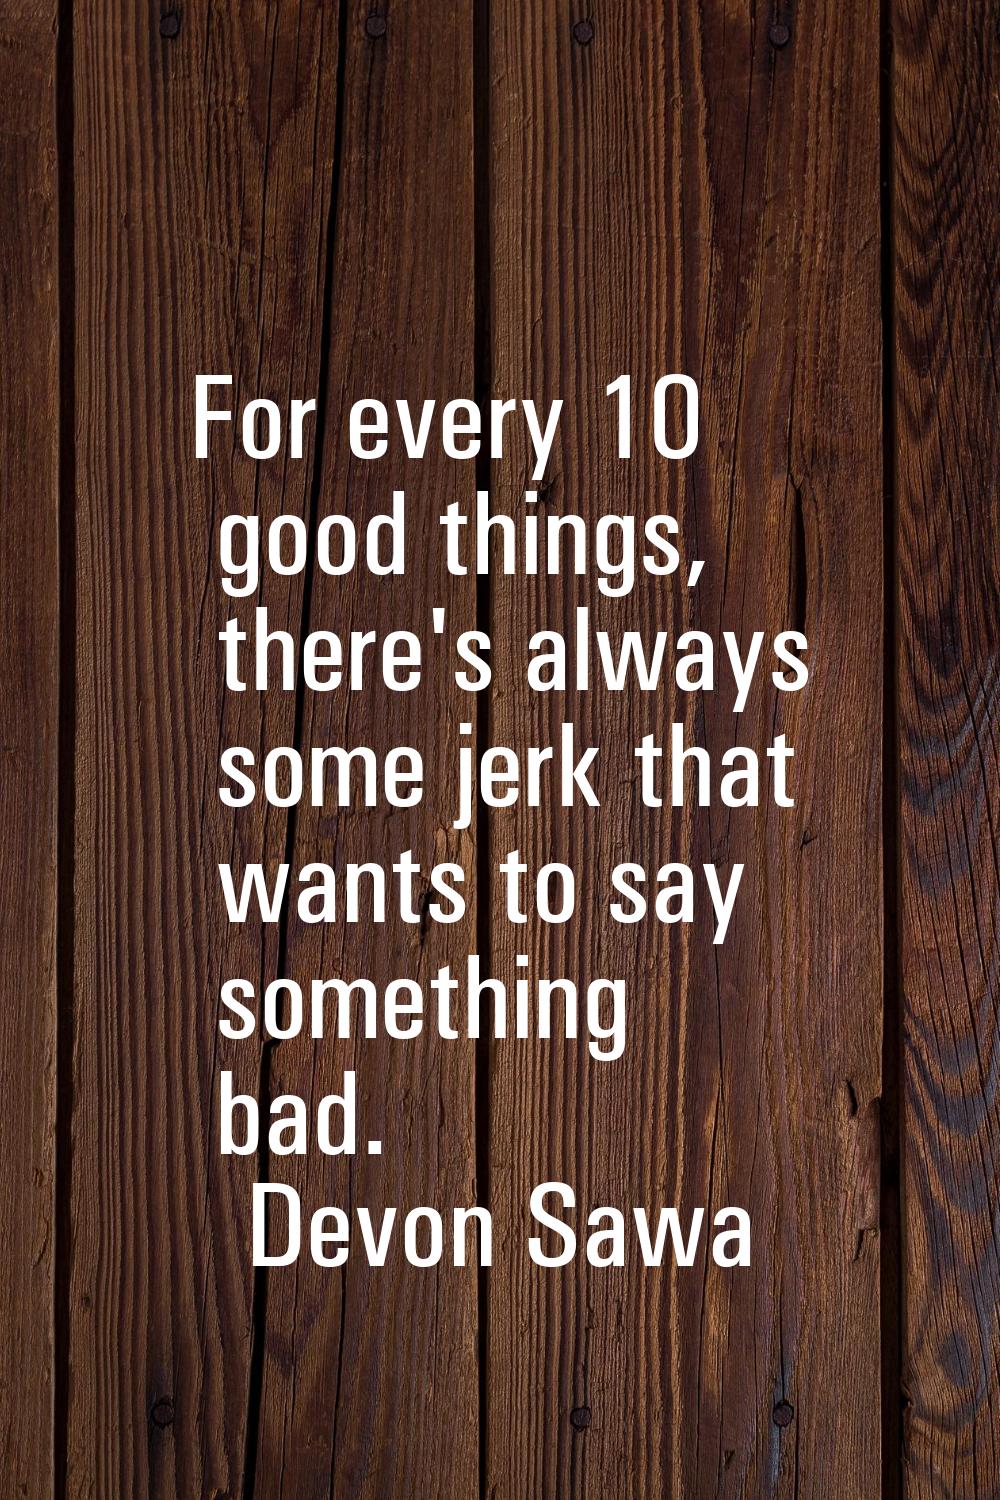 For every 10 good things, there's always some jerk that wants to say something bad.